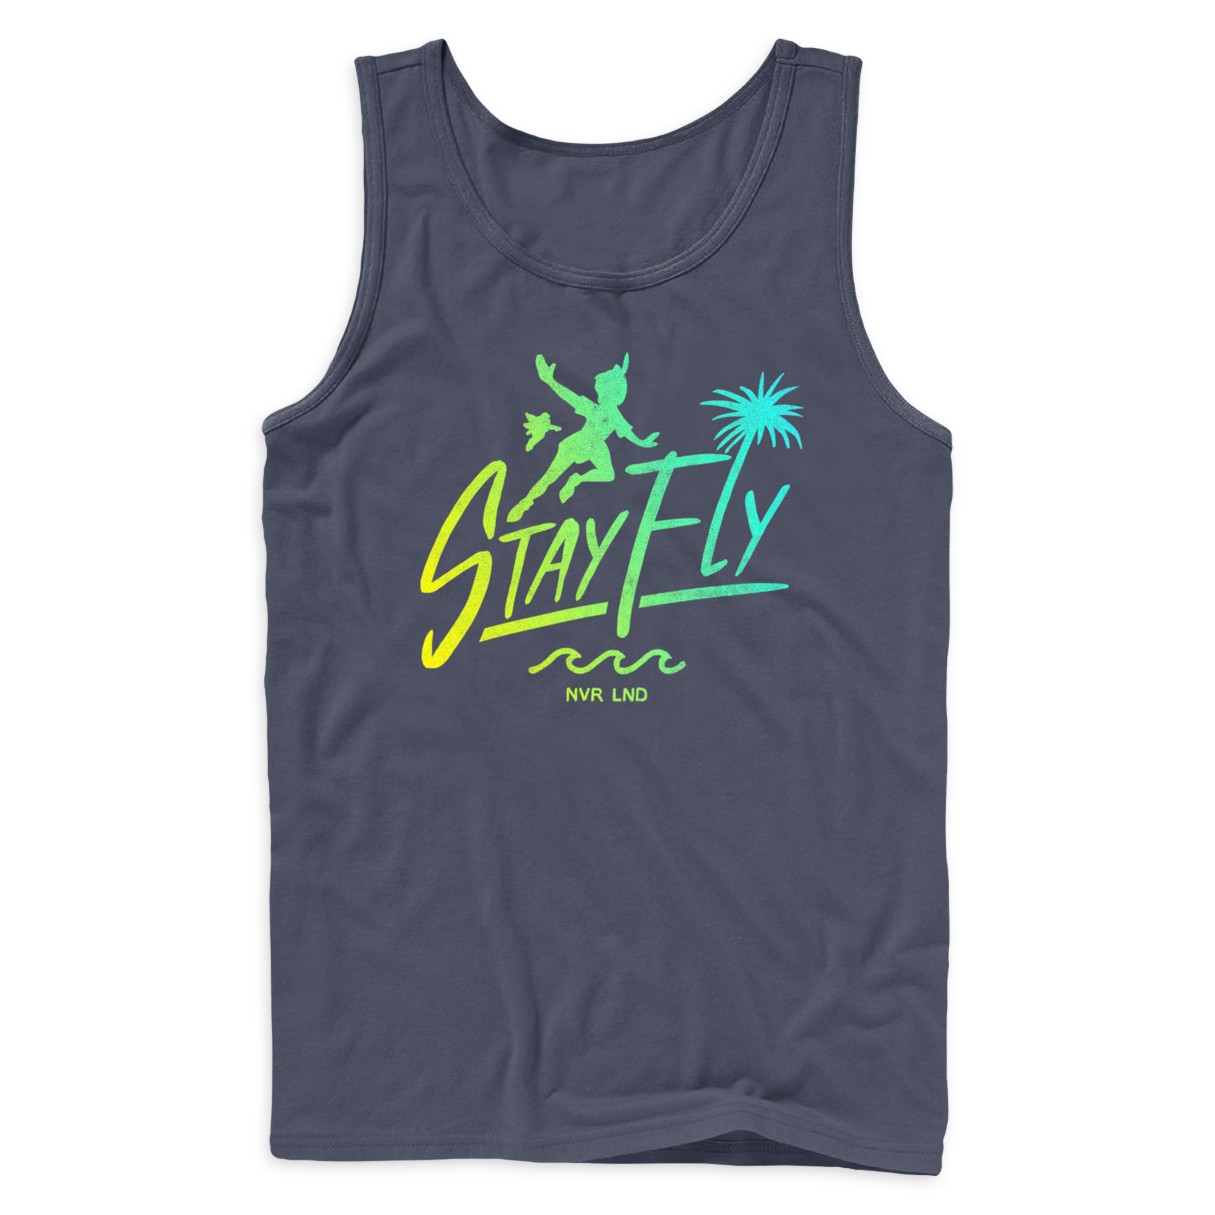 Peter Pan and Tinker Bell Tank Top for Adults